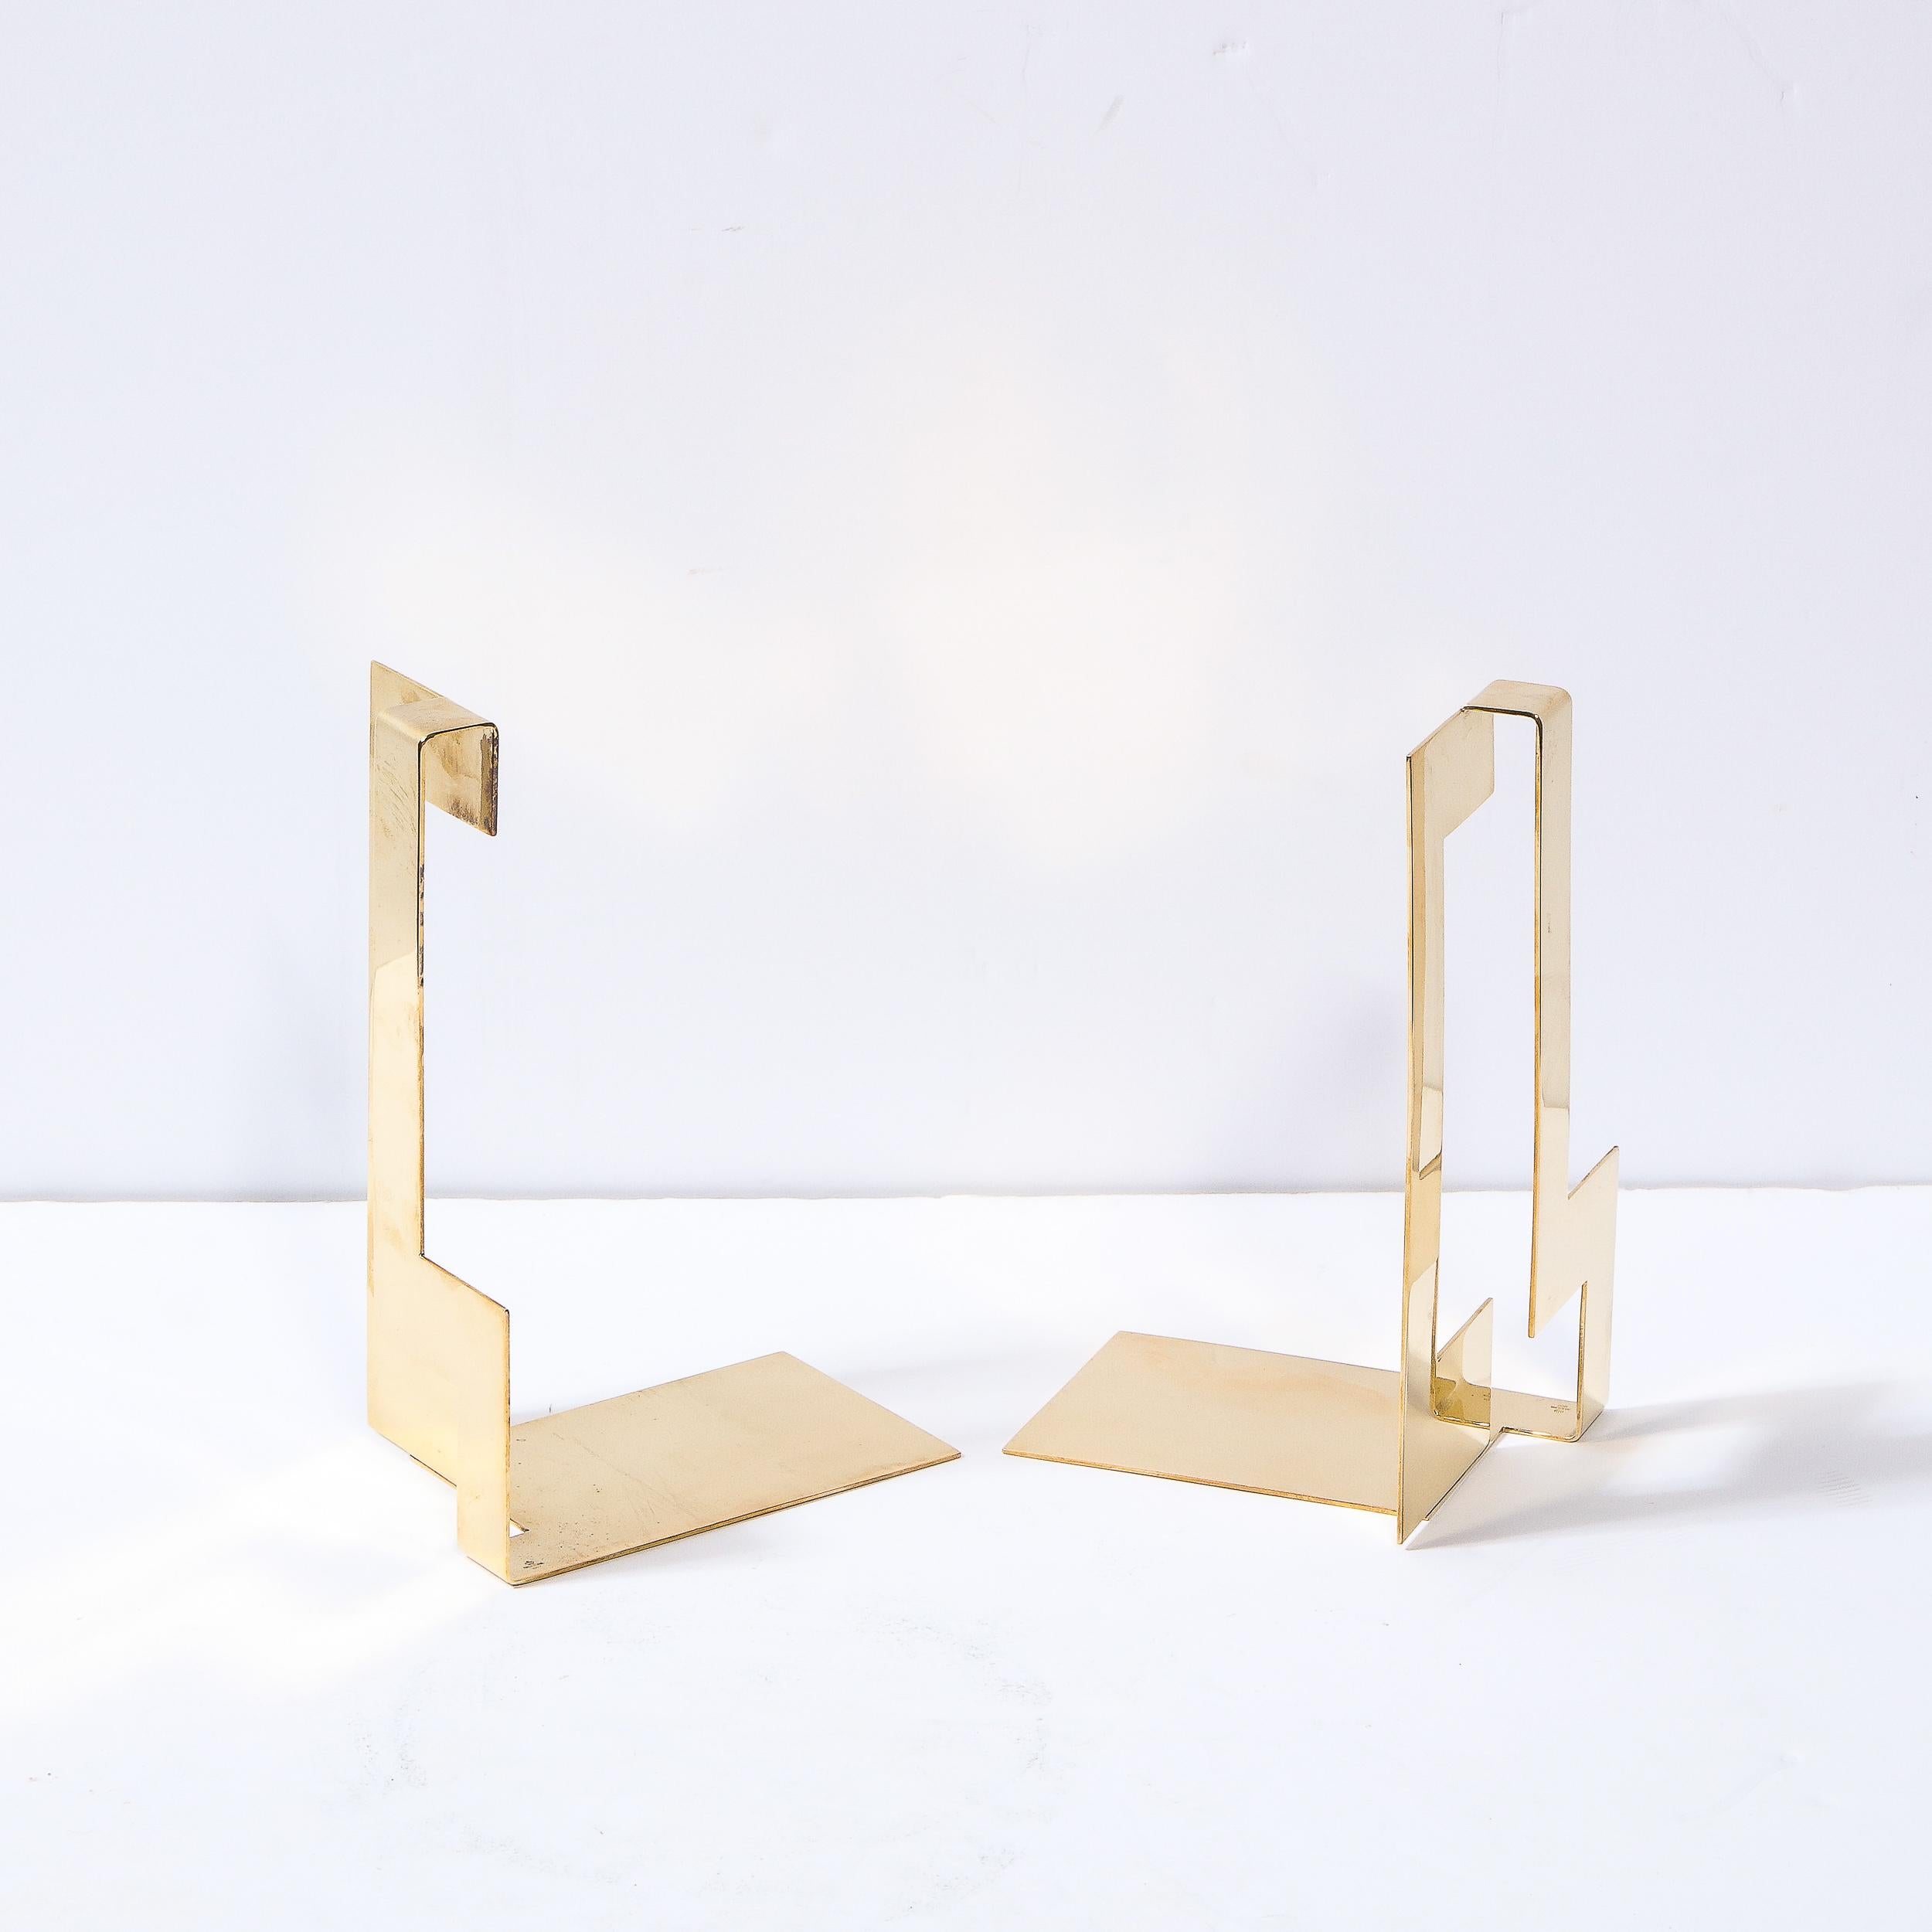 Swedish Pair of Scandinavian Modernist Polished Brass Rectilinear Bookends by Skultana For Sale